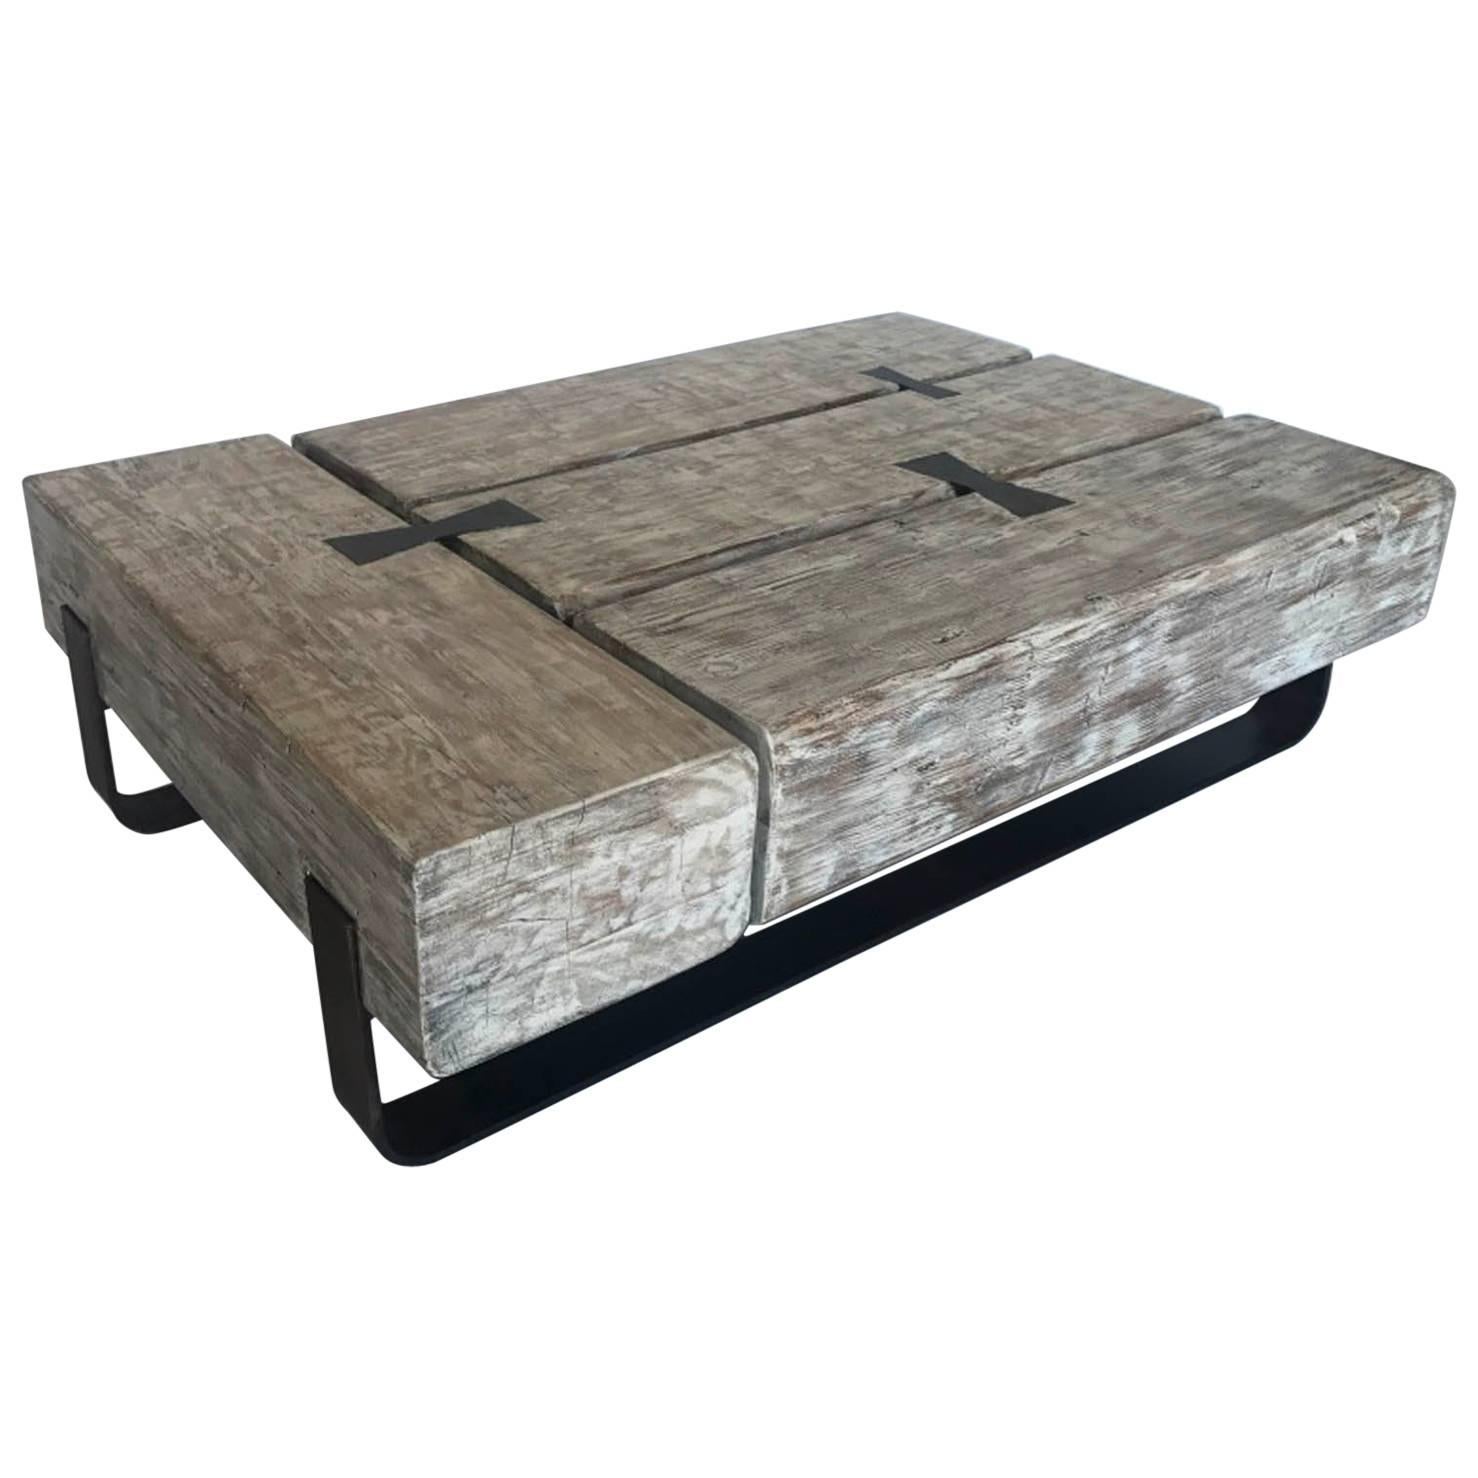 Reclaimed Beam Coffee Table with Iron Base by Dos Gallos Studio